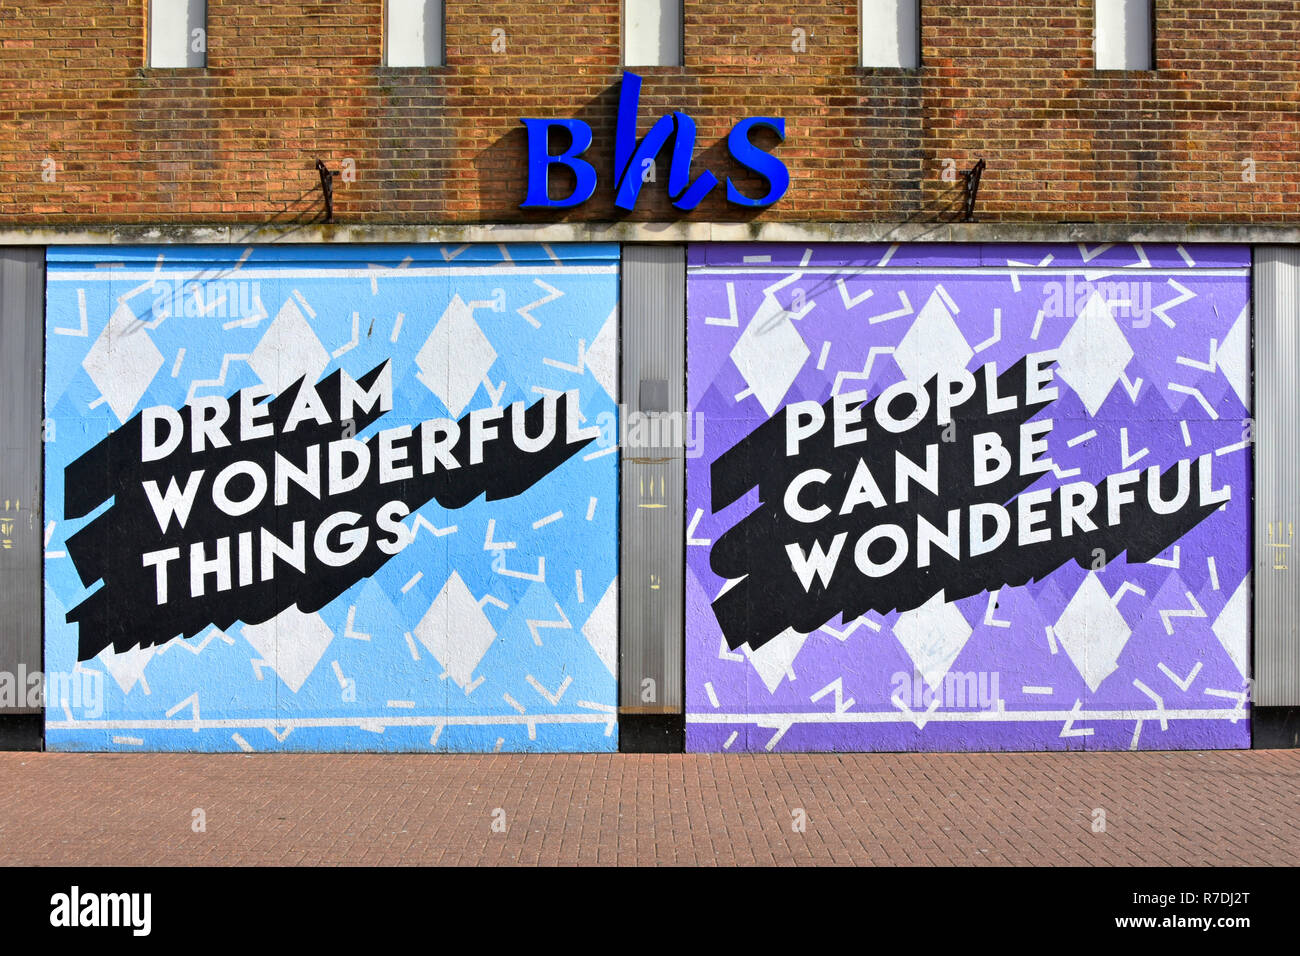 British Home Stores shop front window painted hoarding below iconic BHS store logo sign after business failure & entered administration Southend UK Stock Photo